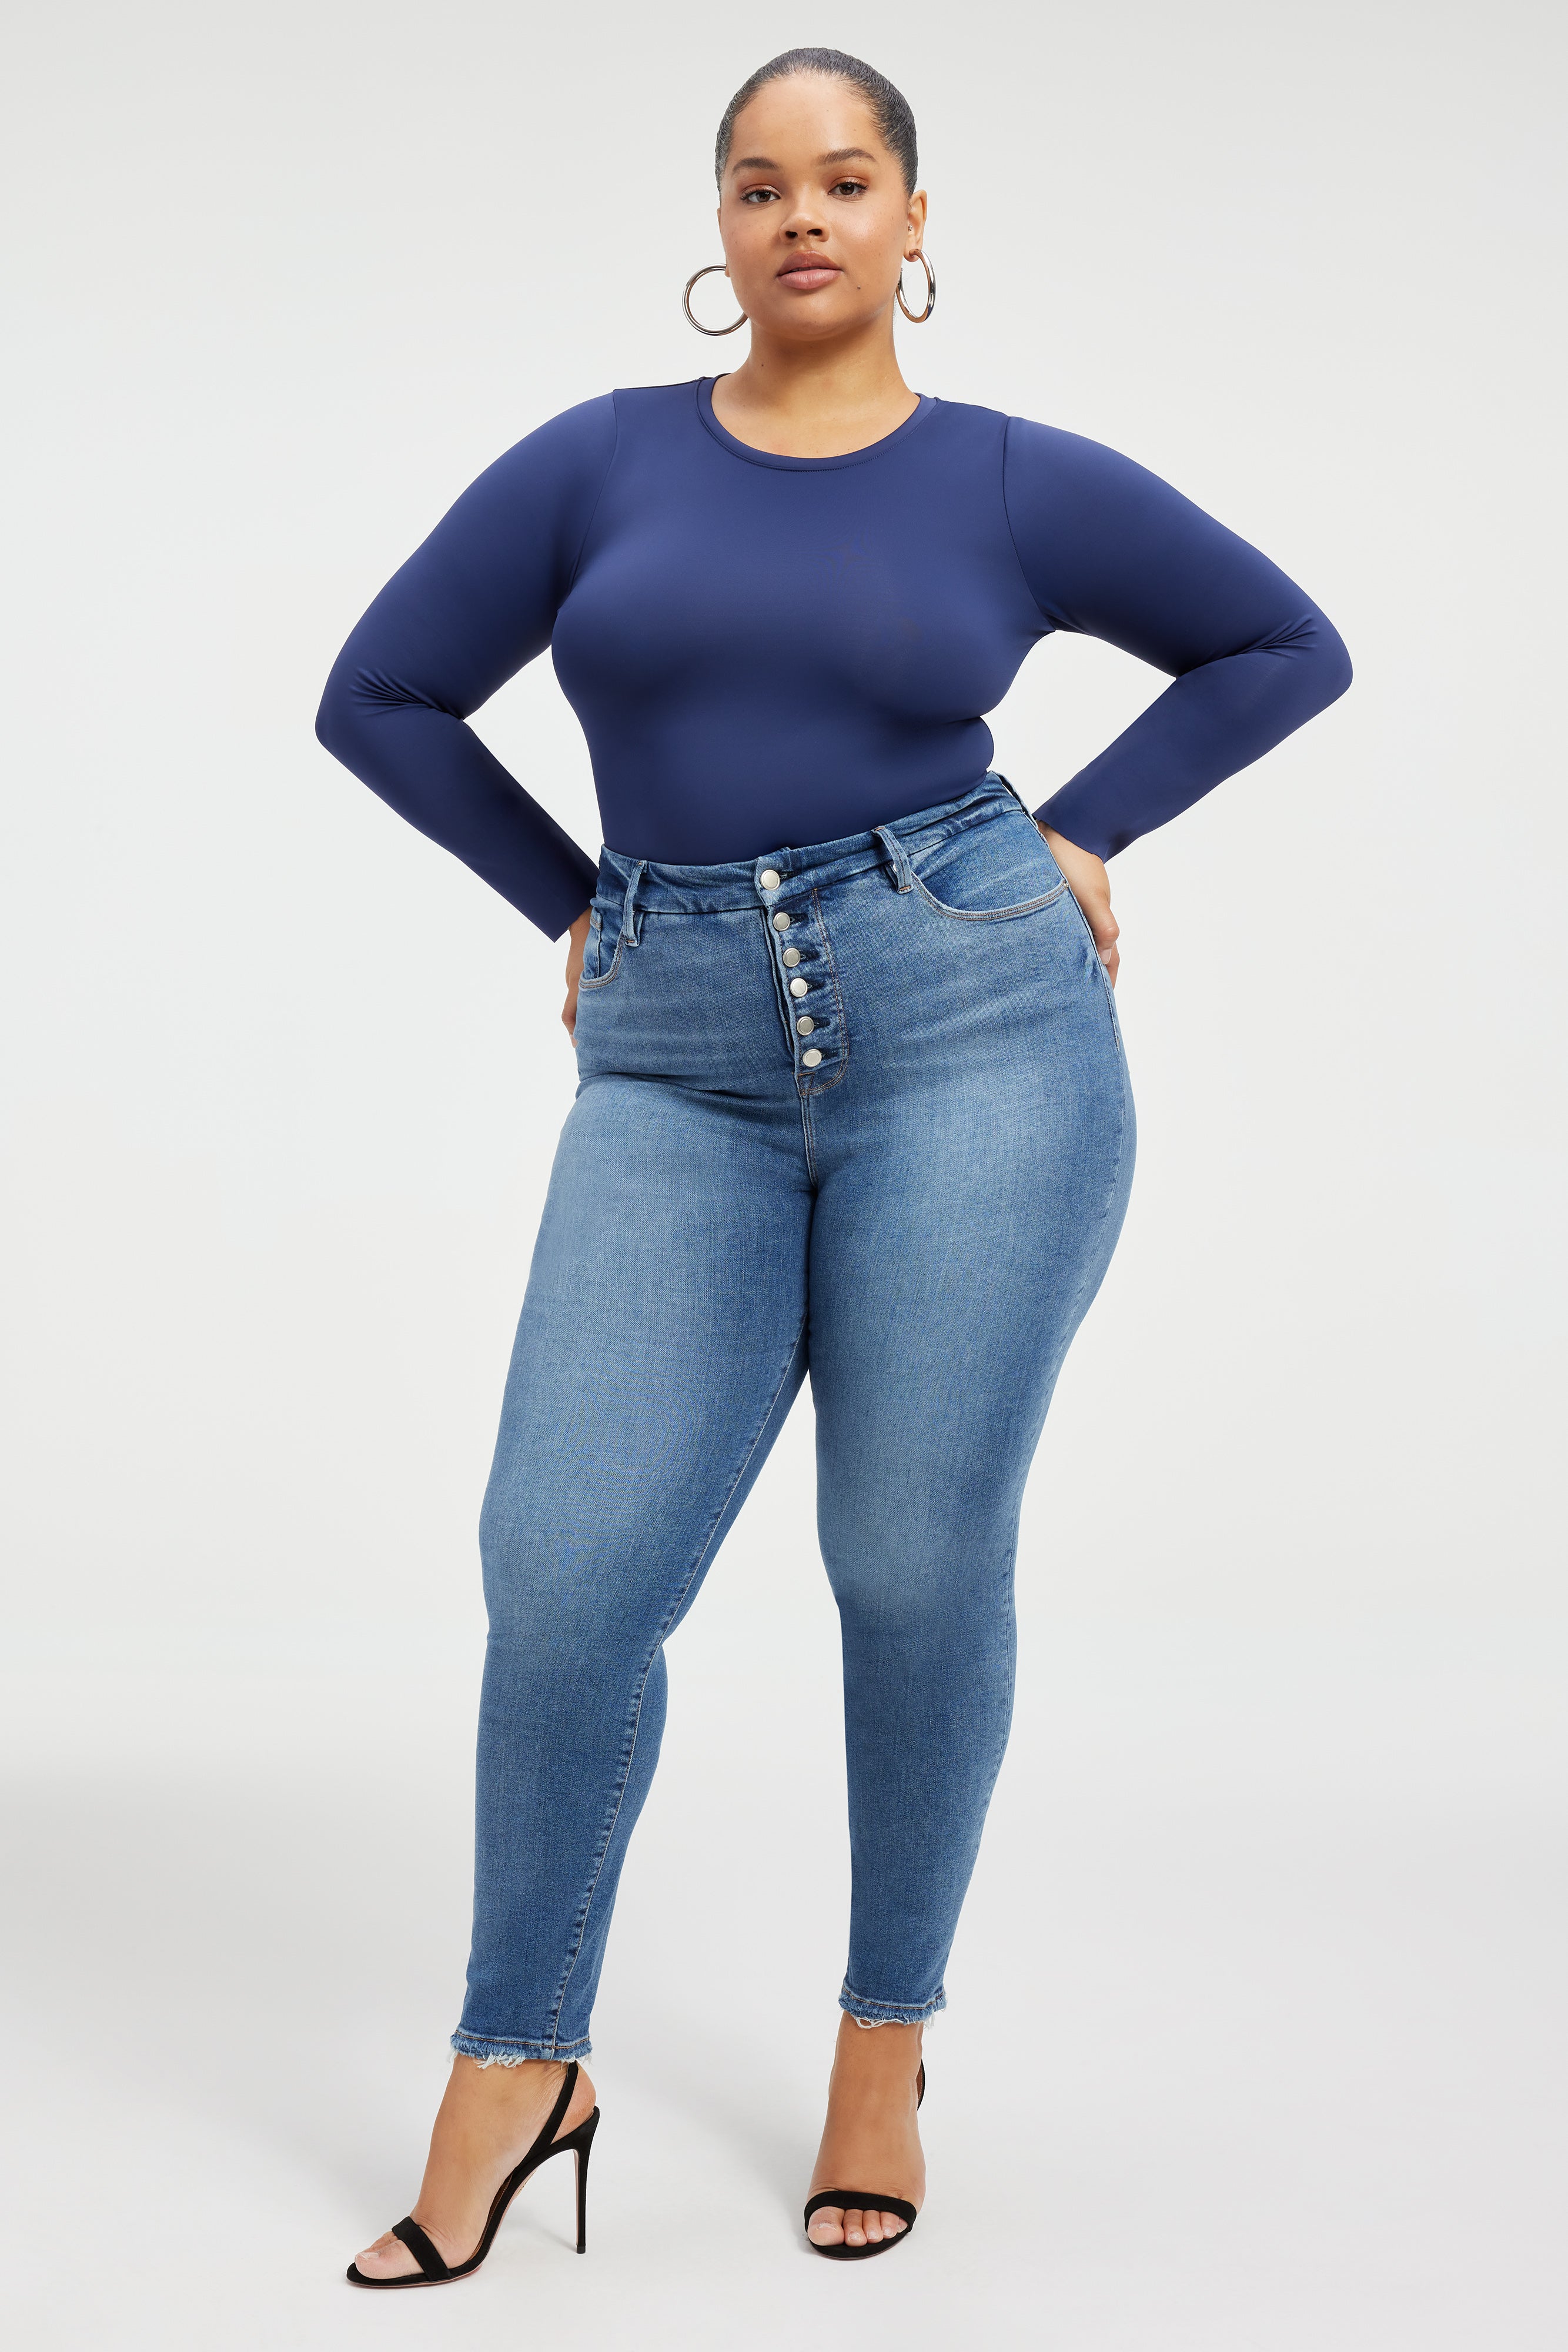 How To Shop For Jeans For Curvy Women, According To Stylists | lupon.gov.ph